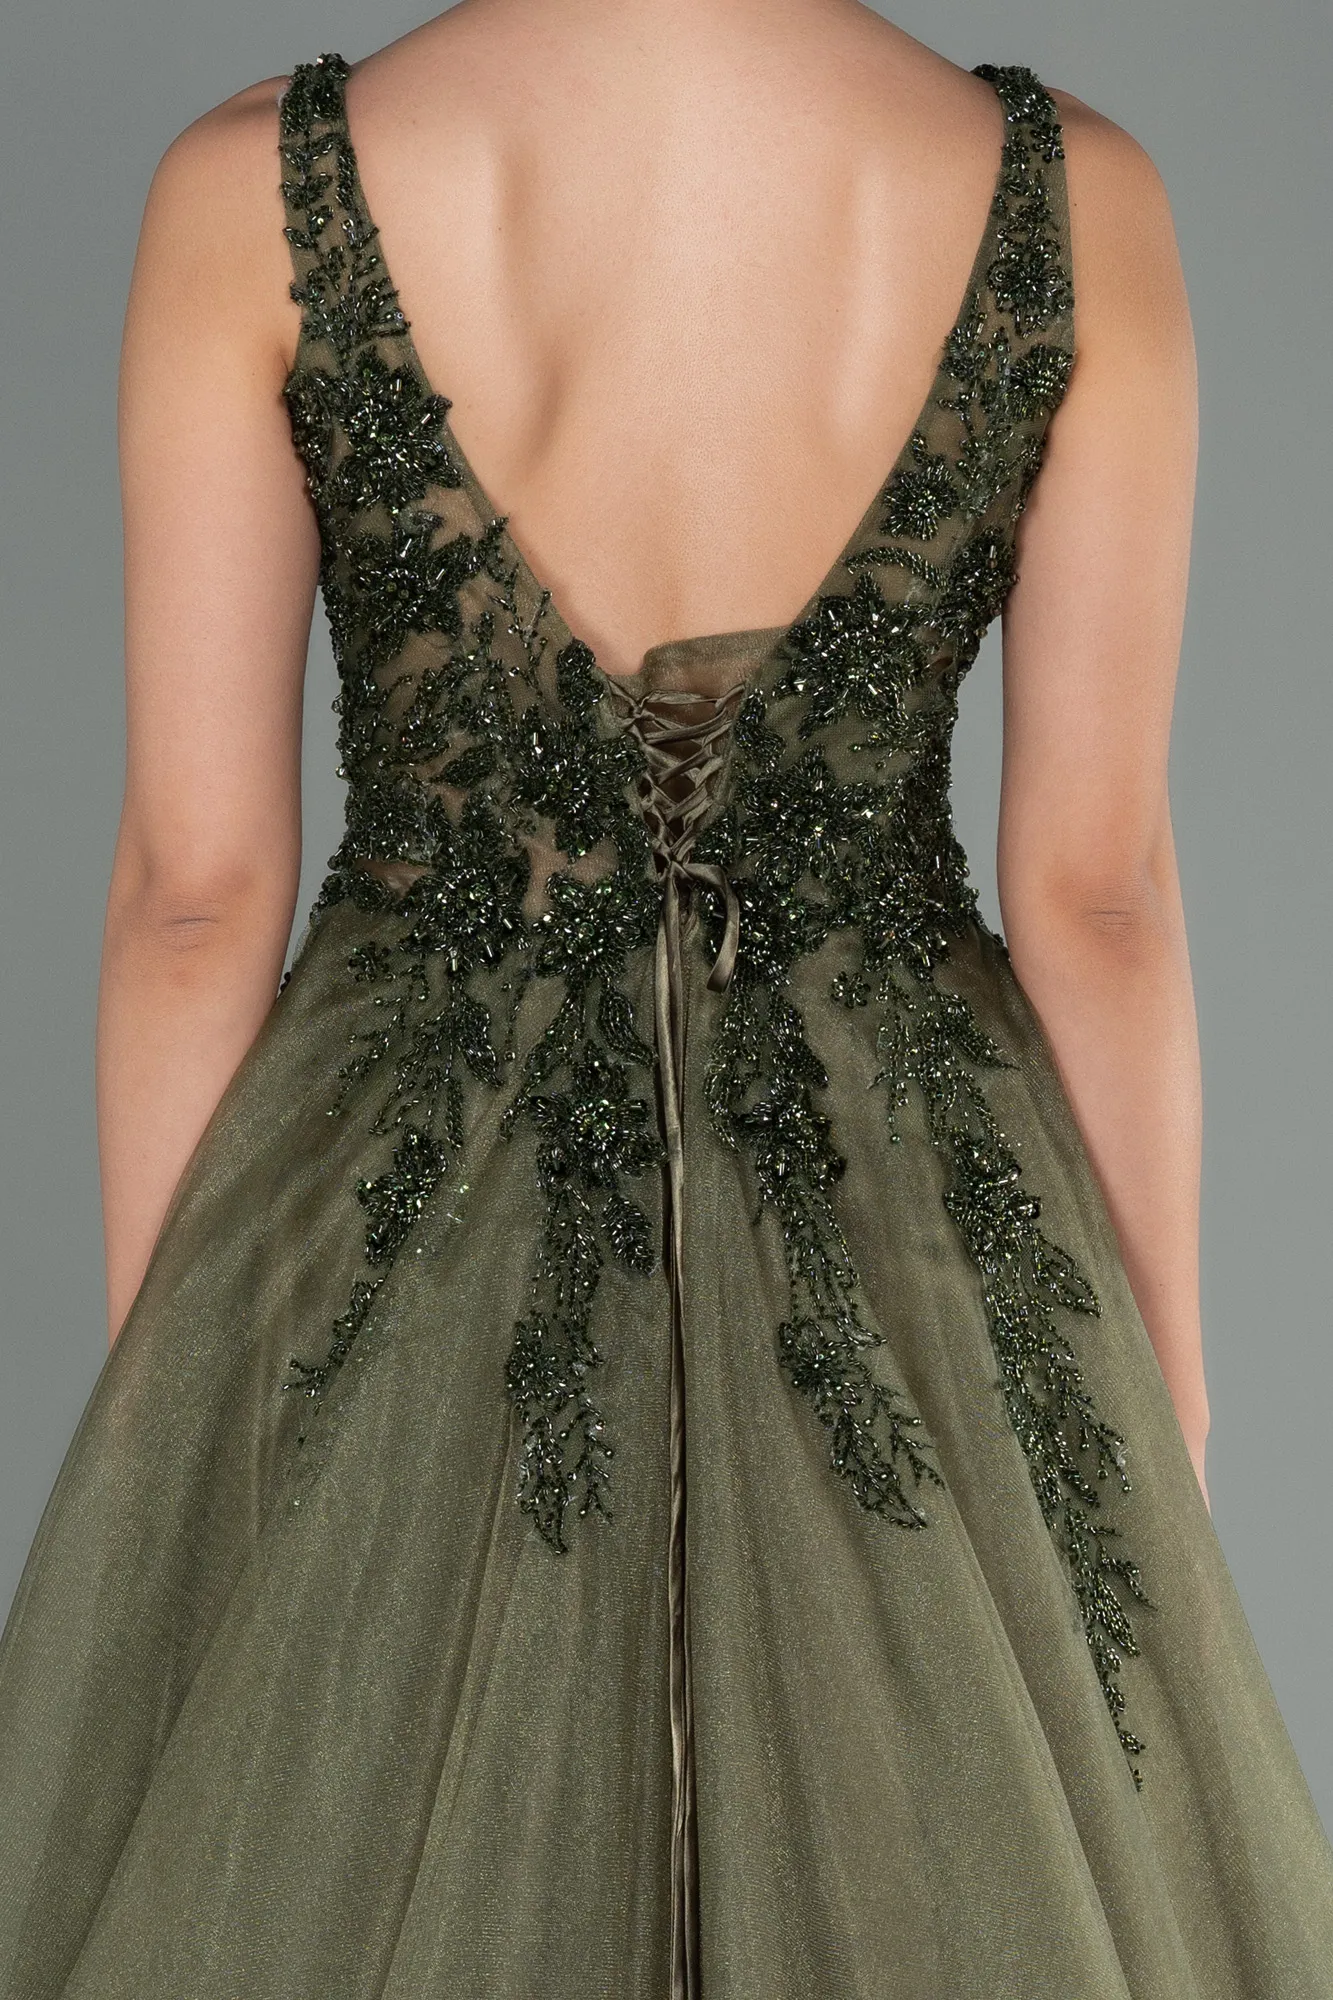 Olive Drab-Long Haute Couture ABU2788